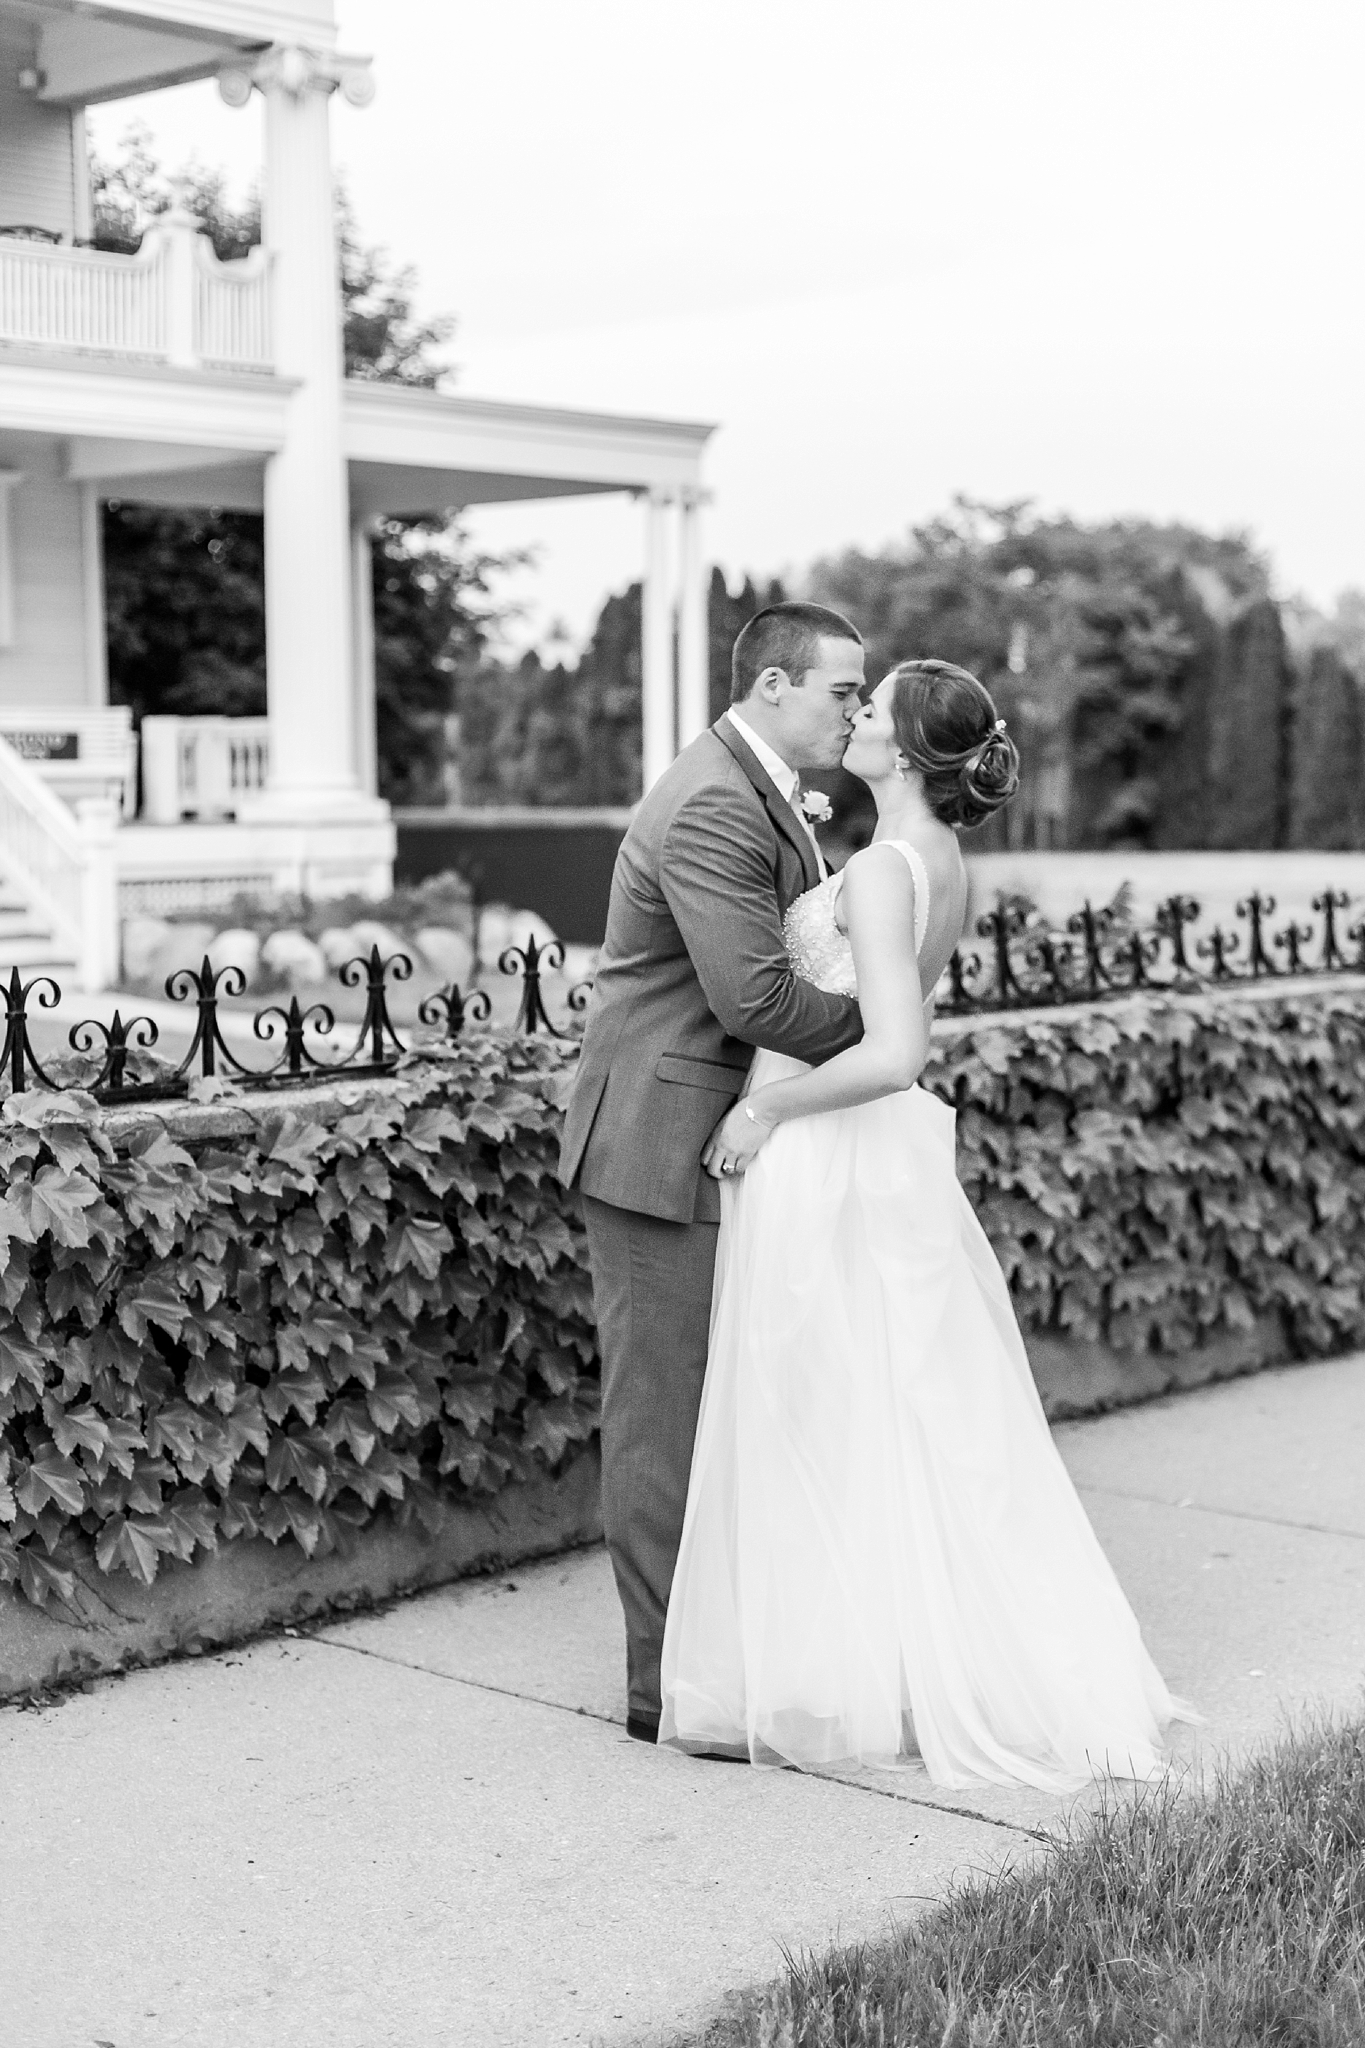 classic-intimate-fun-wedding-photos-at-the-meeting-house-grand-ballroom-in-plymouth-michigan-by-courtney-carolyn-photography_0102.jpg